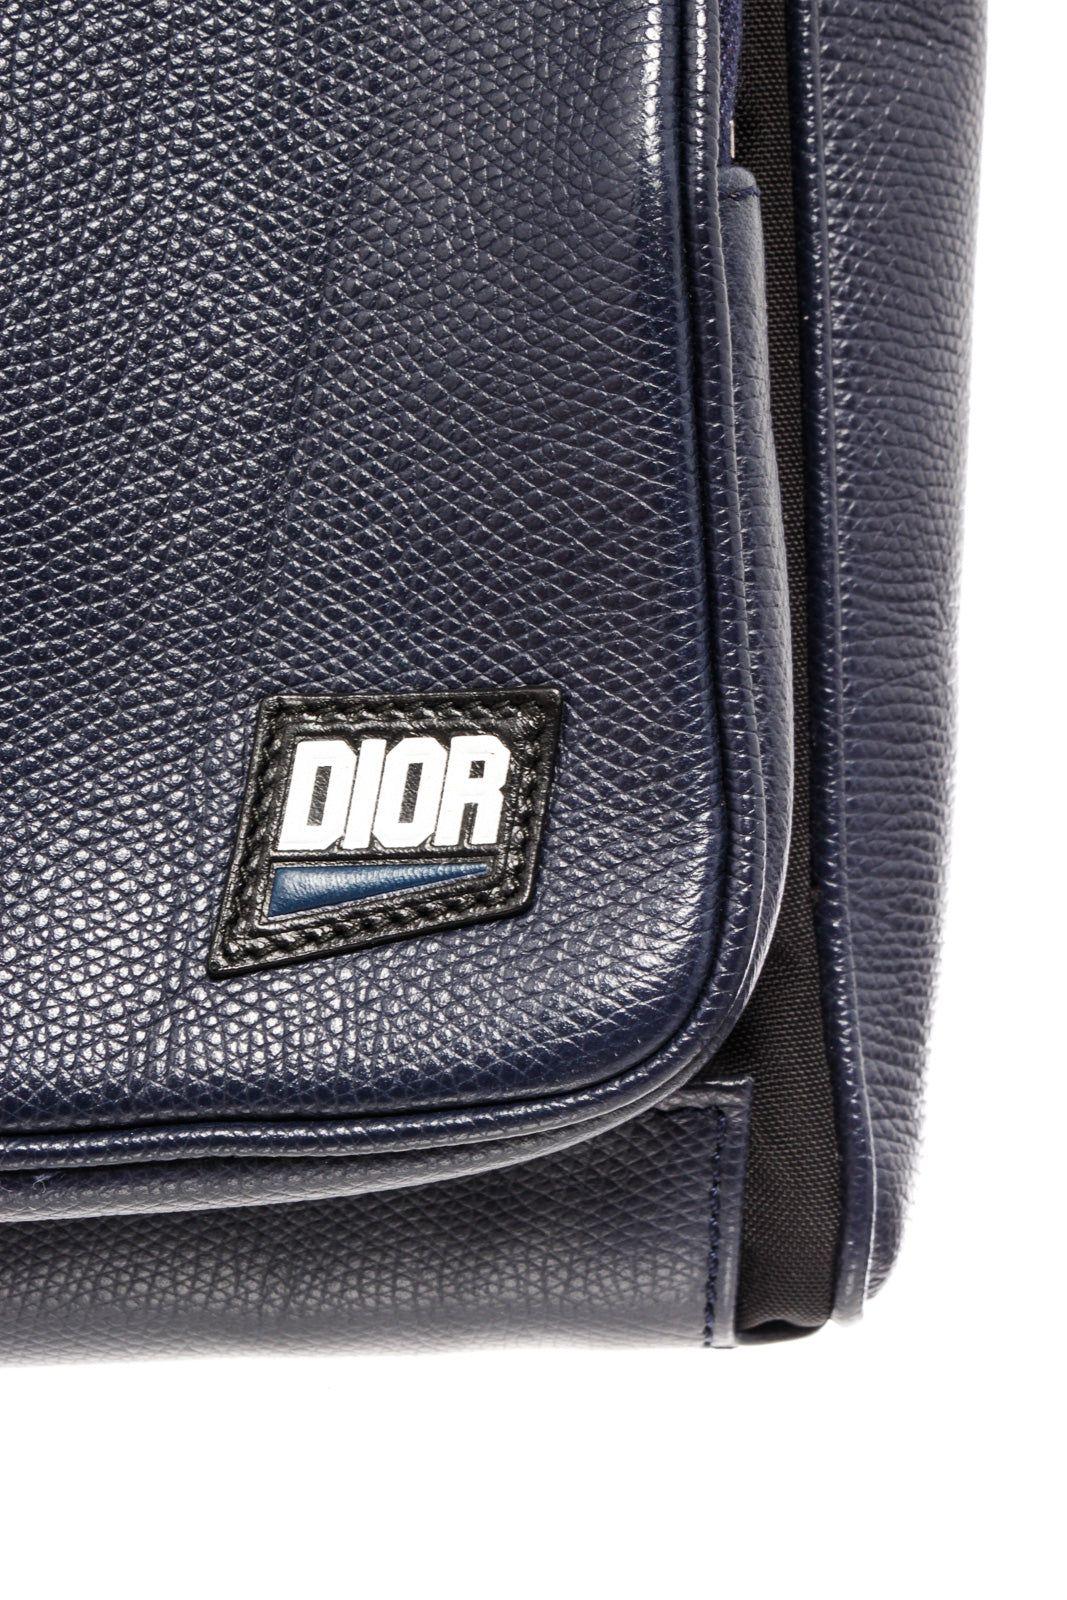 Black and blue leather Dior Homme messengers crossbody bag with silver-tone hardware, one zipper pocket at front, black adjustable straps, and black suede interior lining.



50973MSC